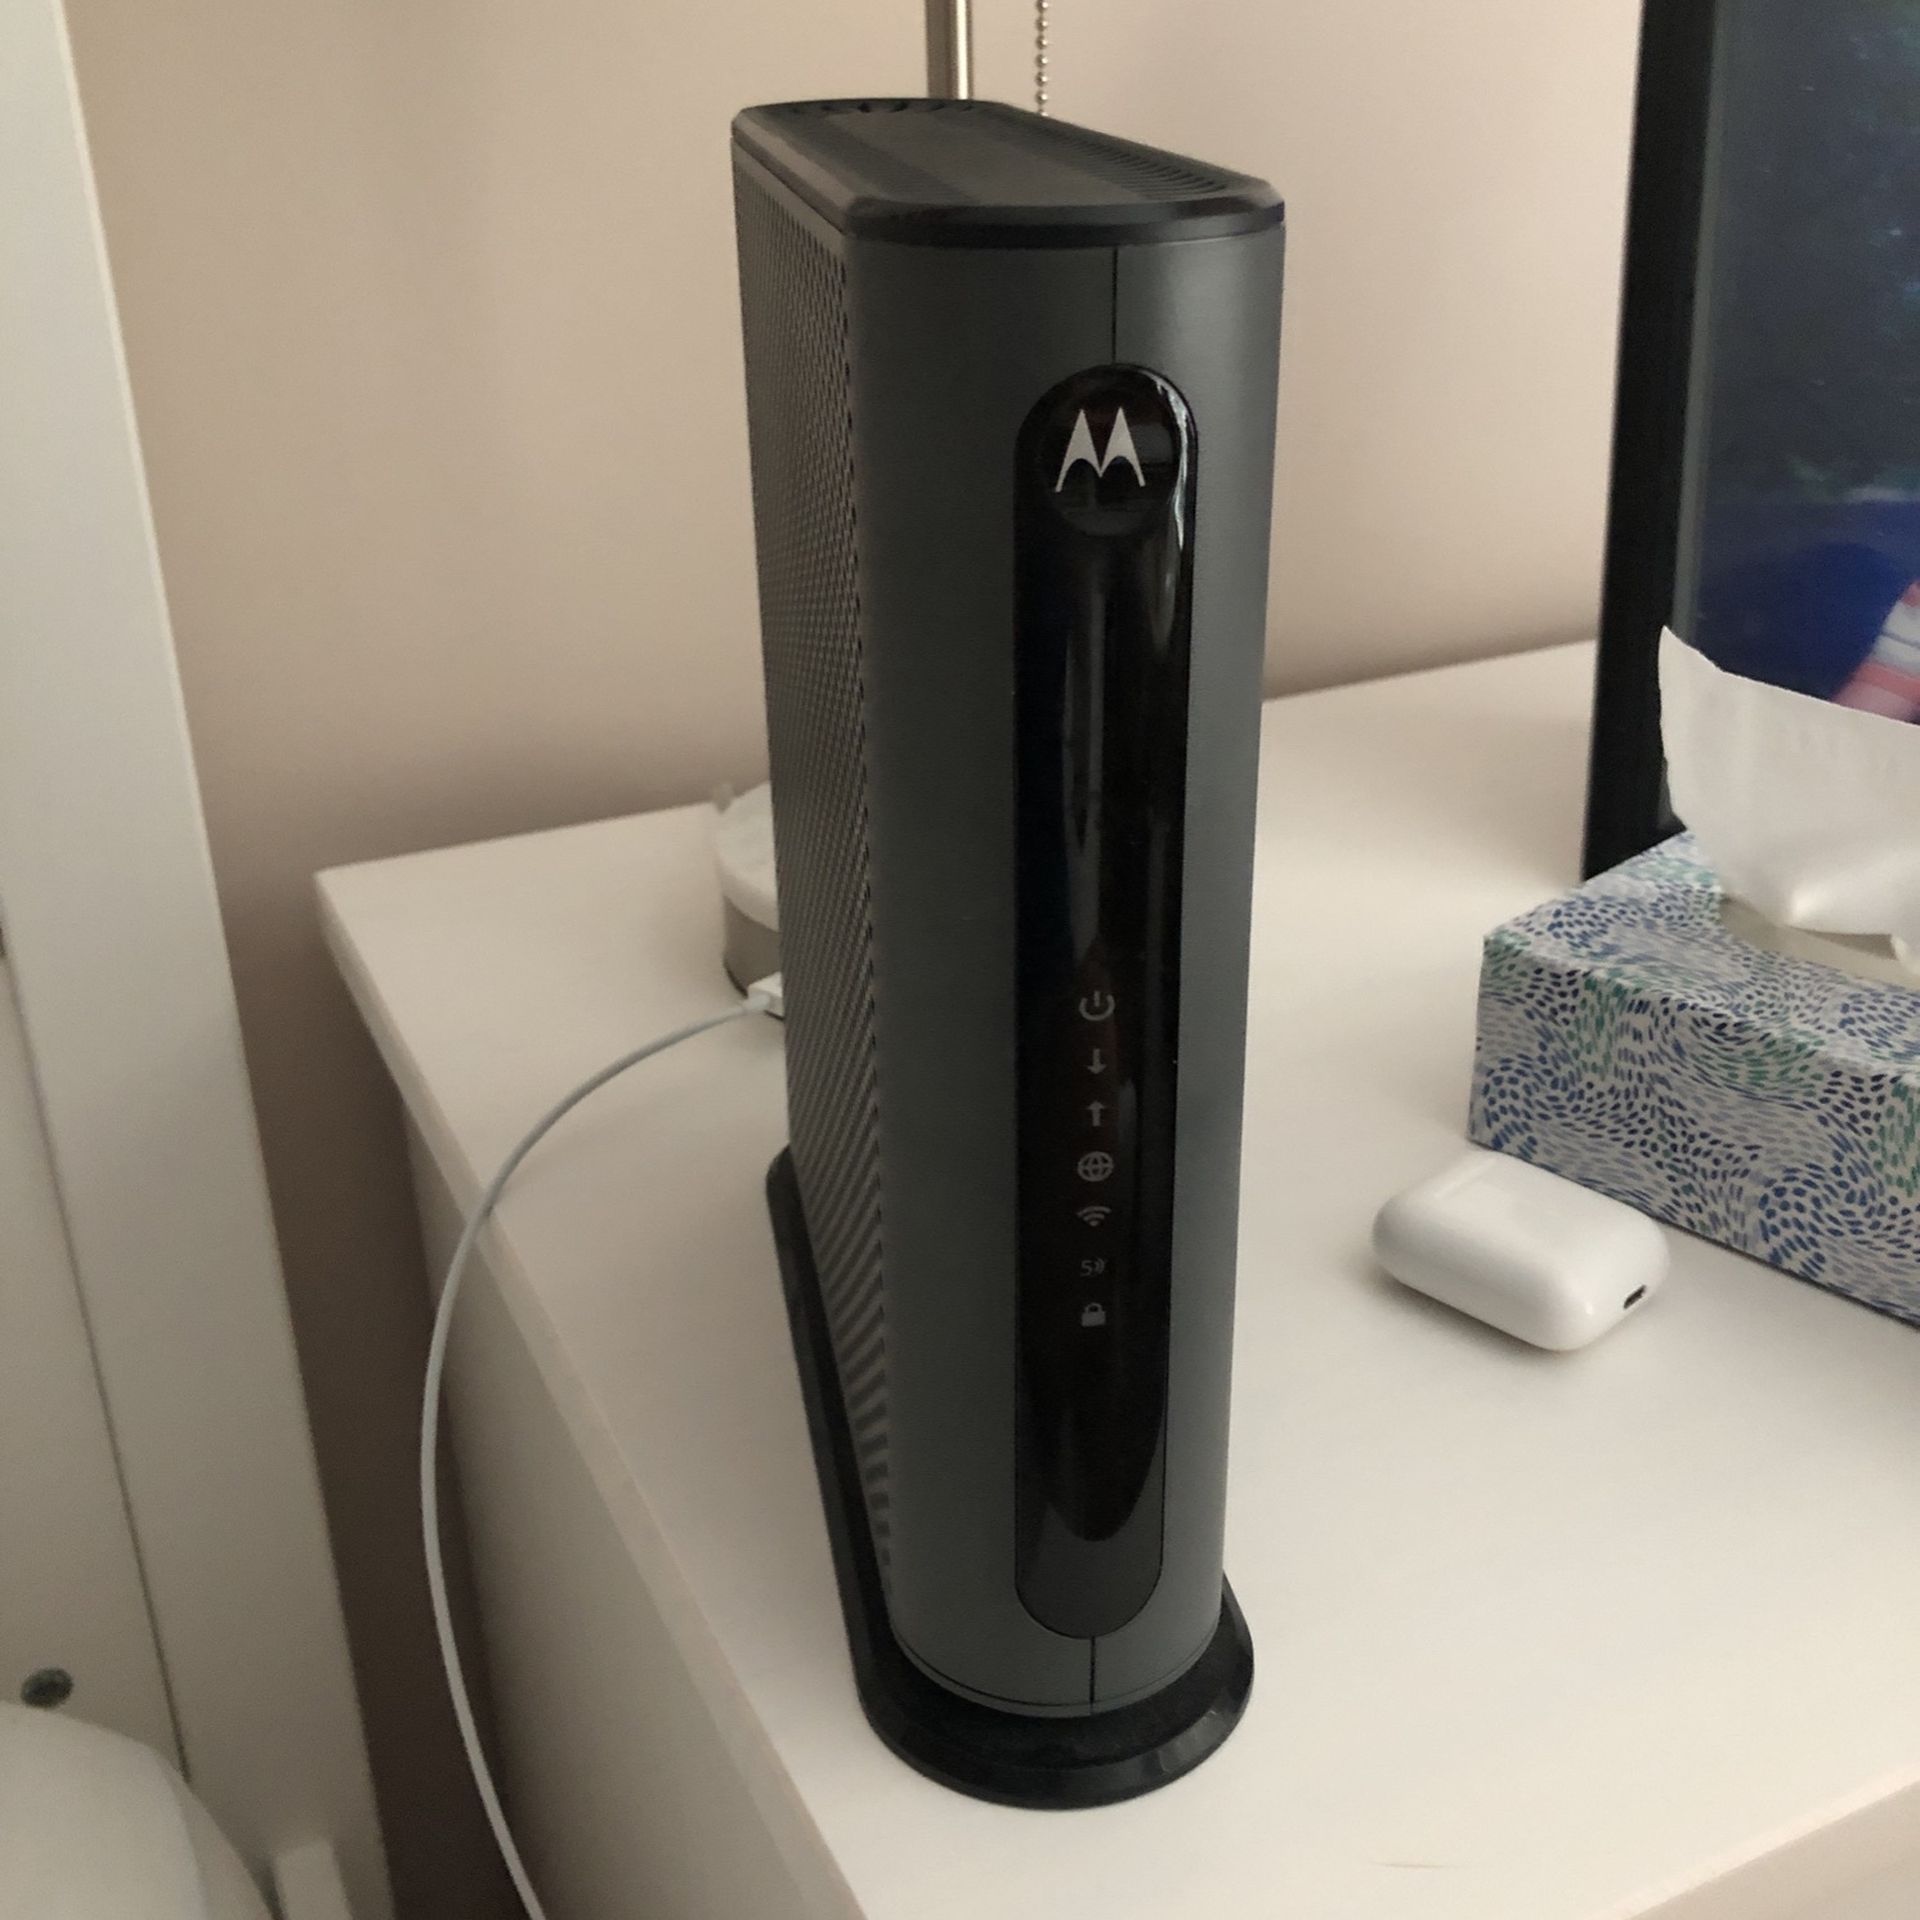 Motorola Modem And Router Combo